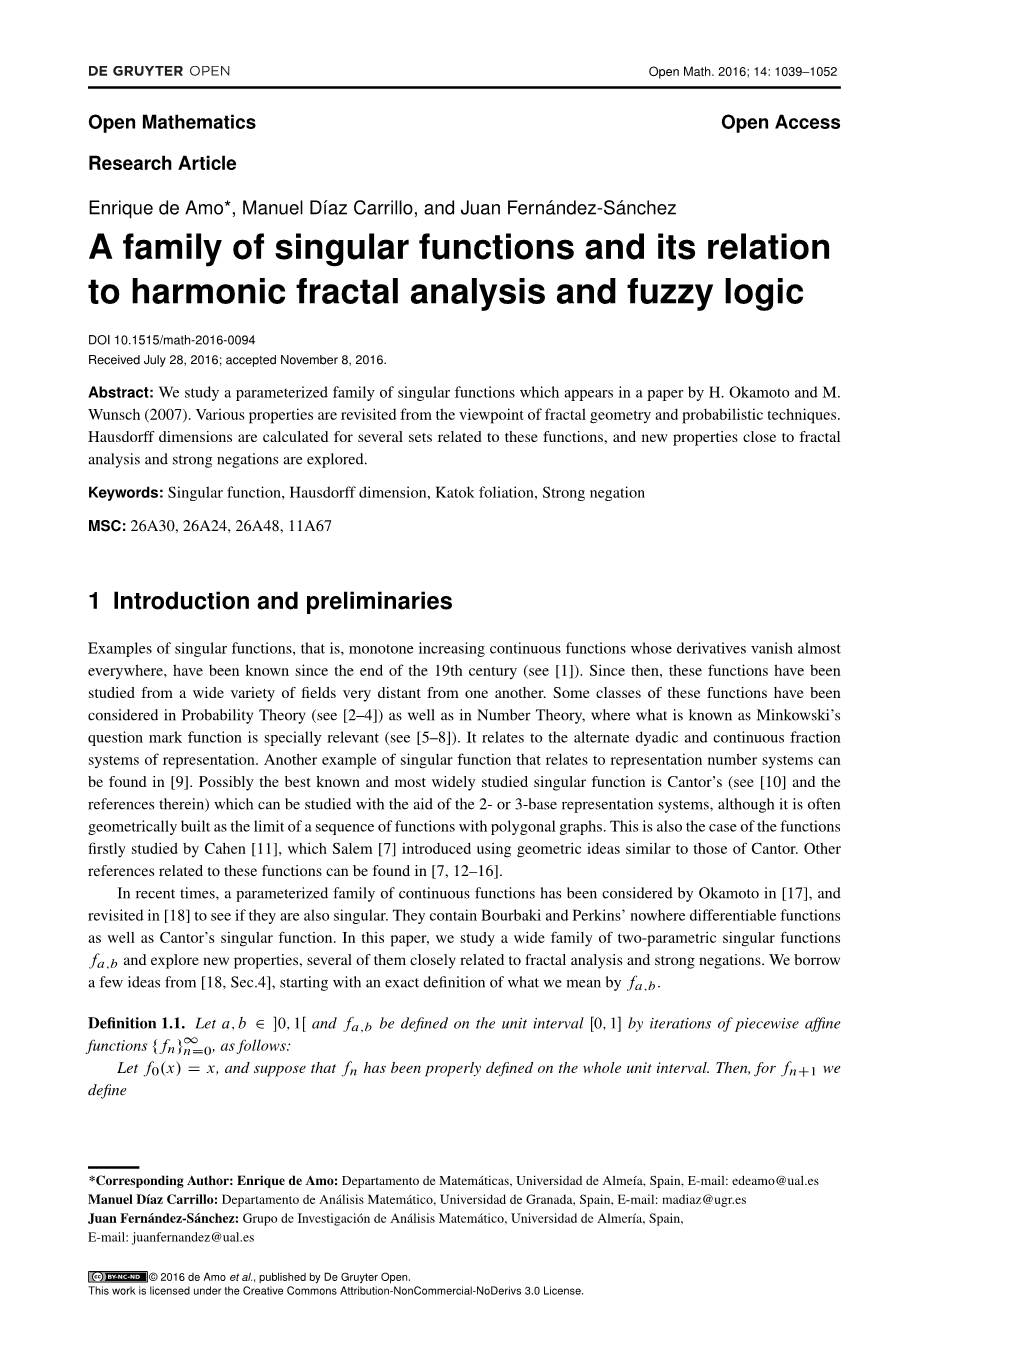 A Family of Singular Functions and Its Relation to Harmonic Fractal Analysis and Fuzzy Logic